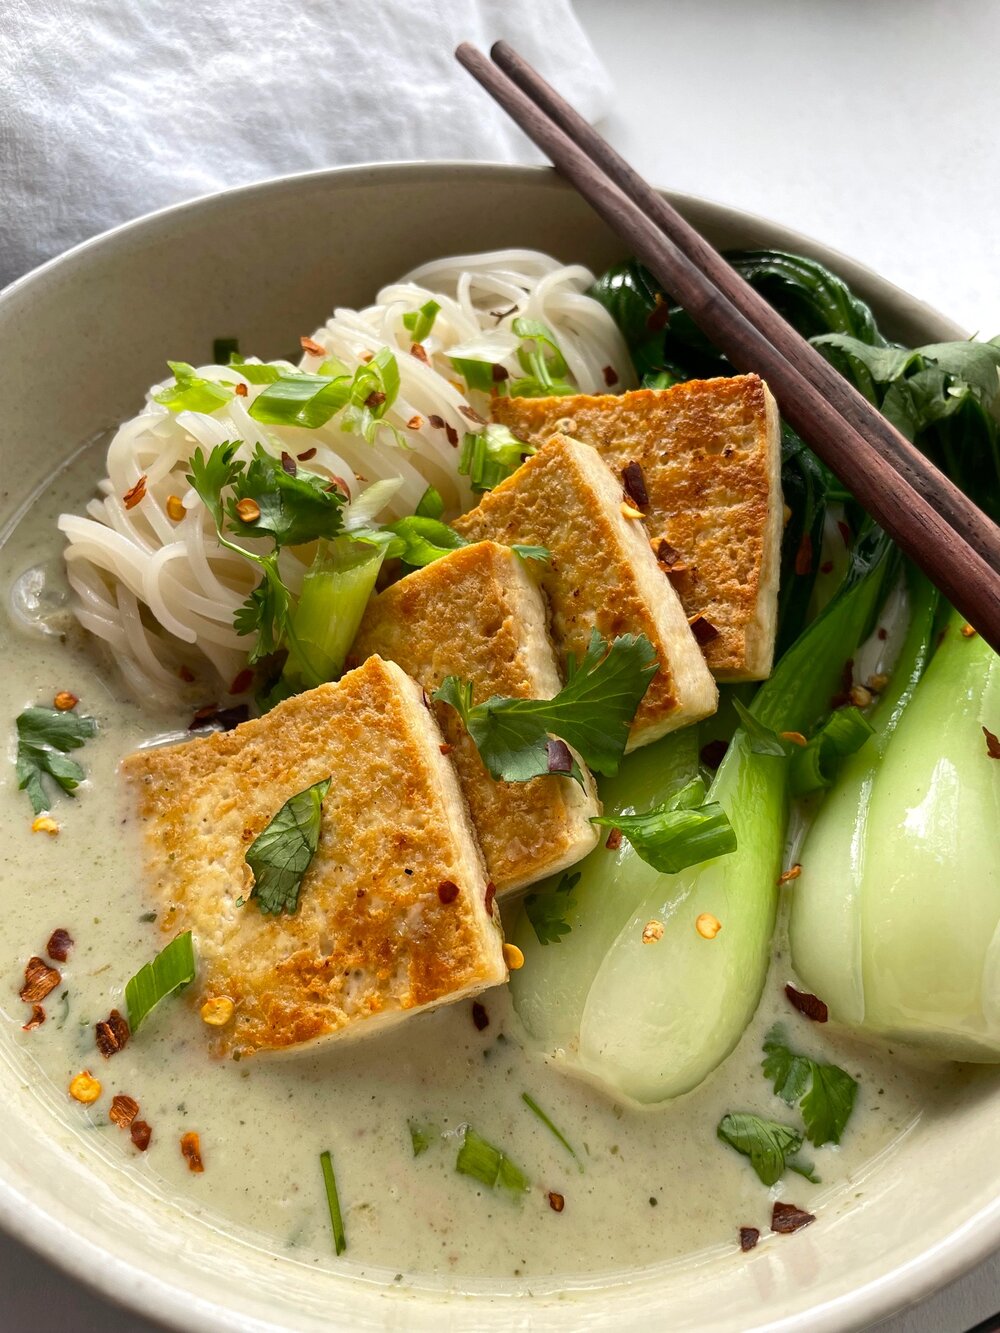 GREEN THAI CURRY WITH RICE NOODLES AND TOFU